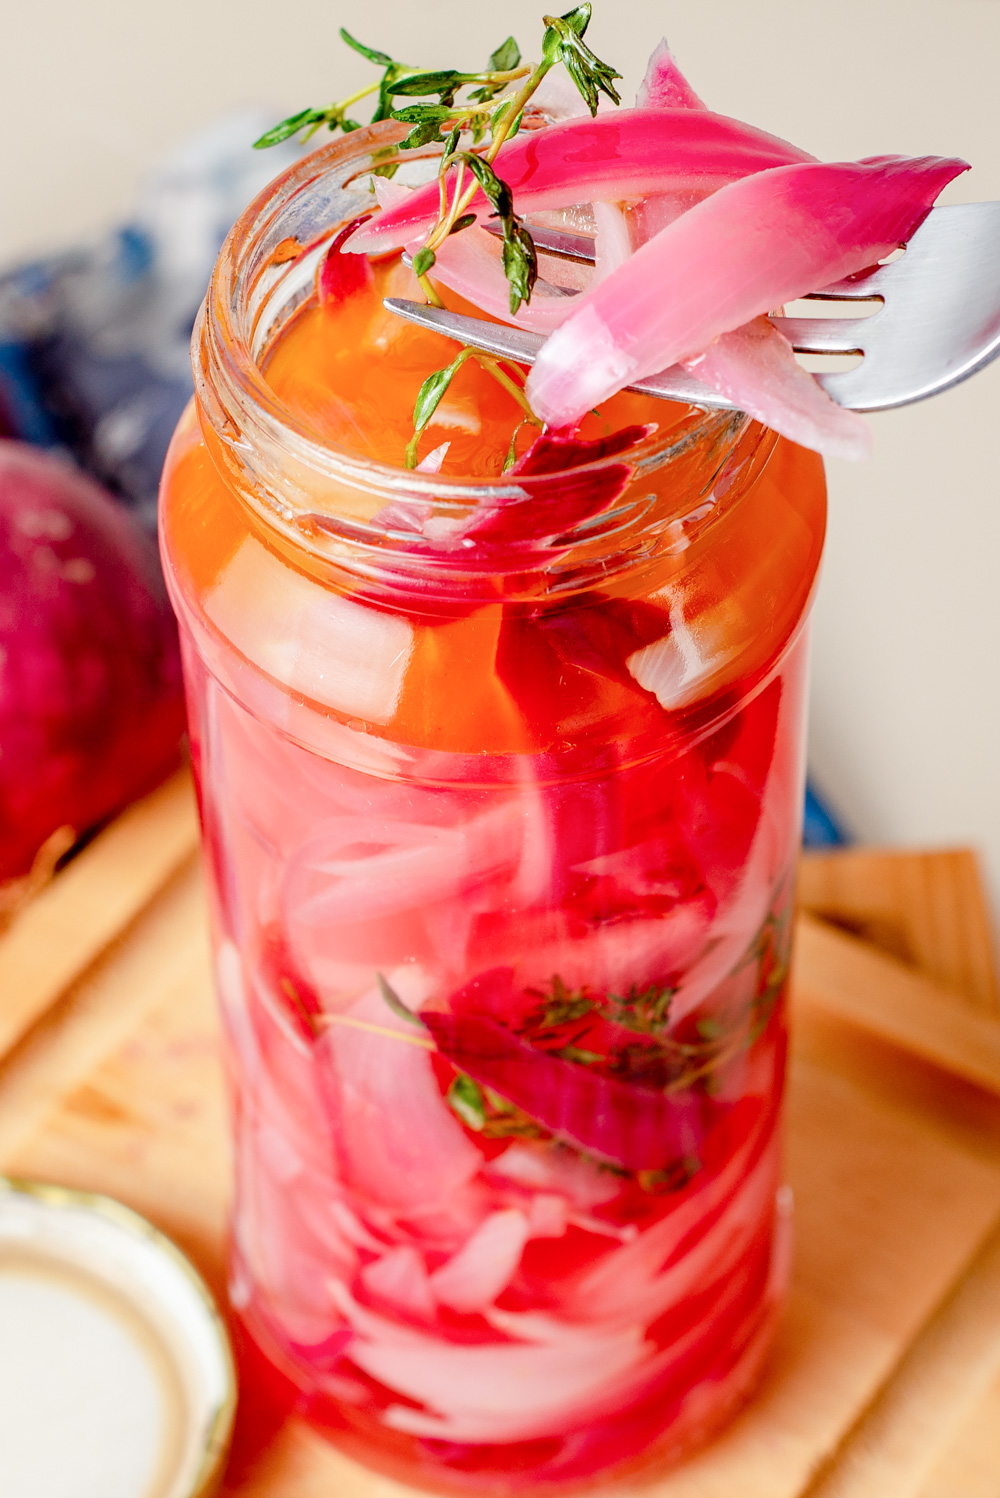 jar with italian pickled onions with thyme